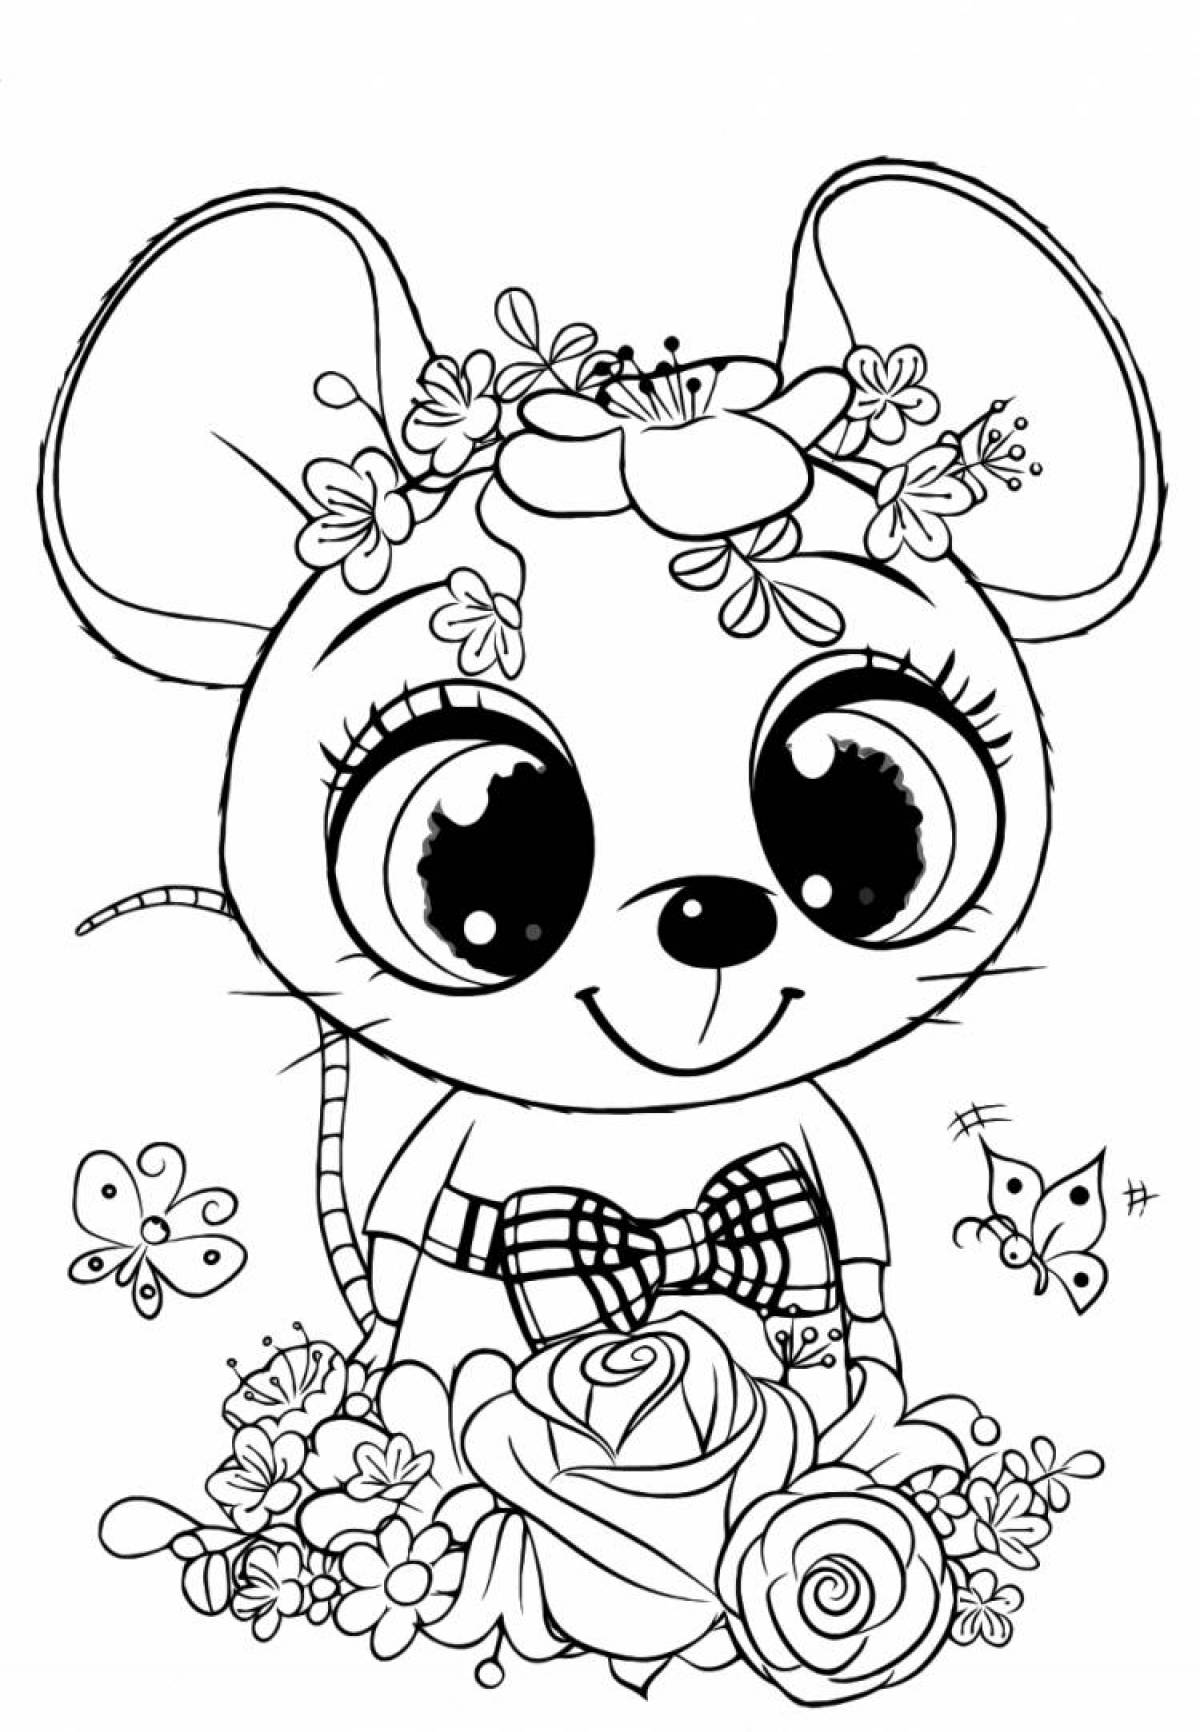 Idyllic coloring for girls cute animals